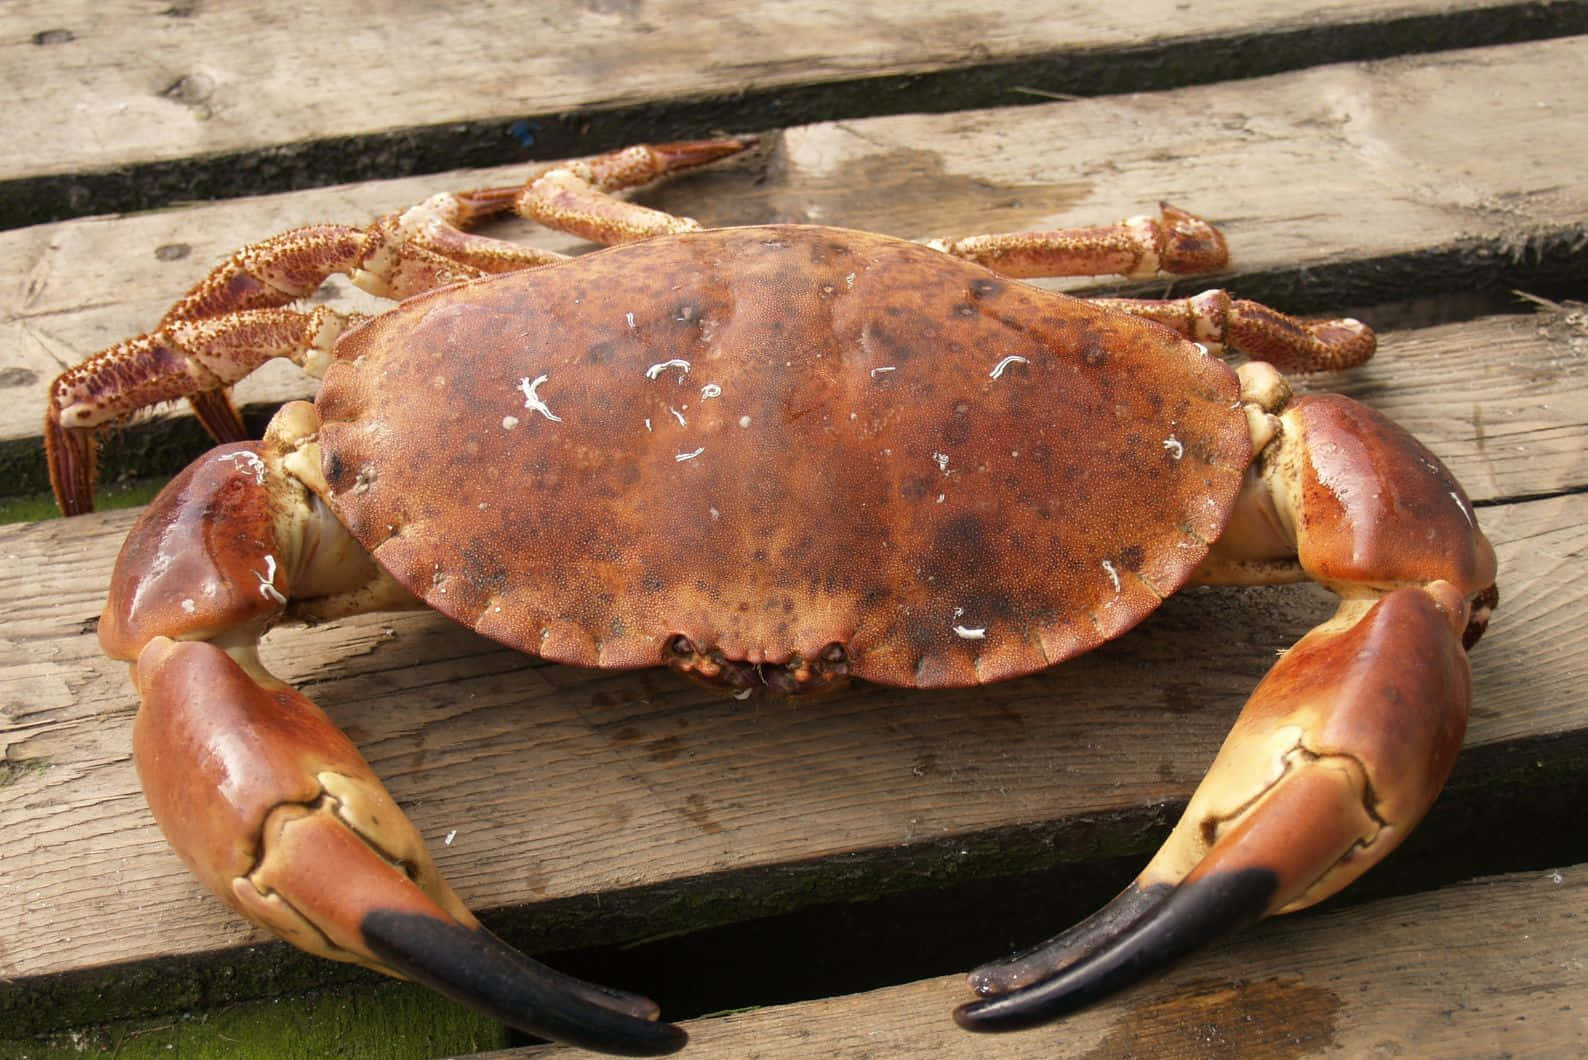 Brown Crab On Wooden Surface.jpg Wallpaper